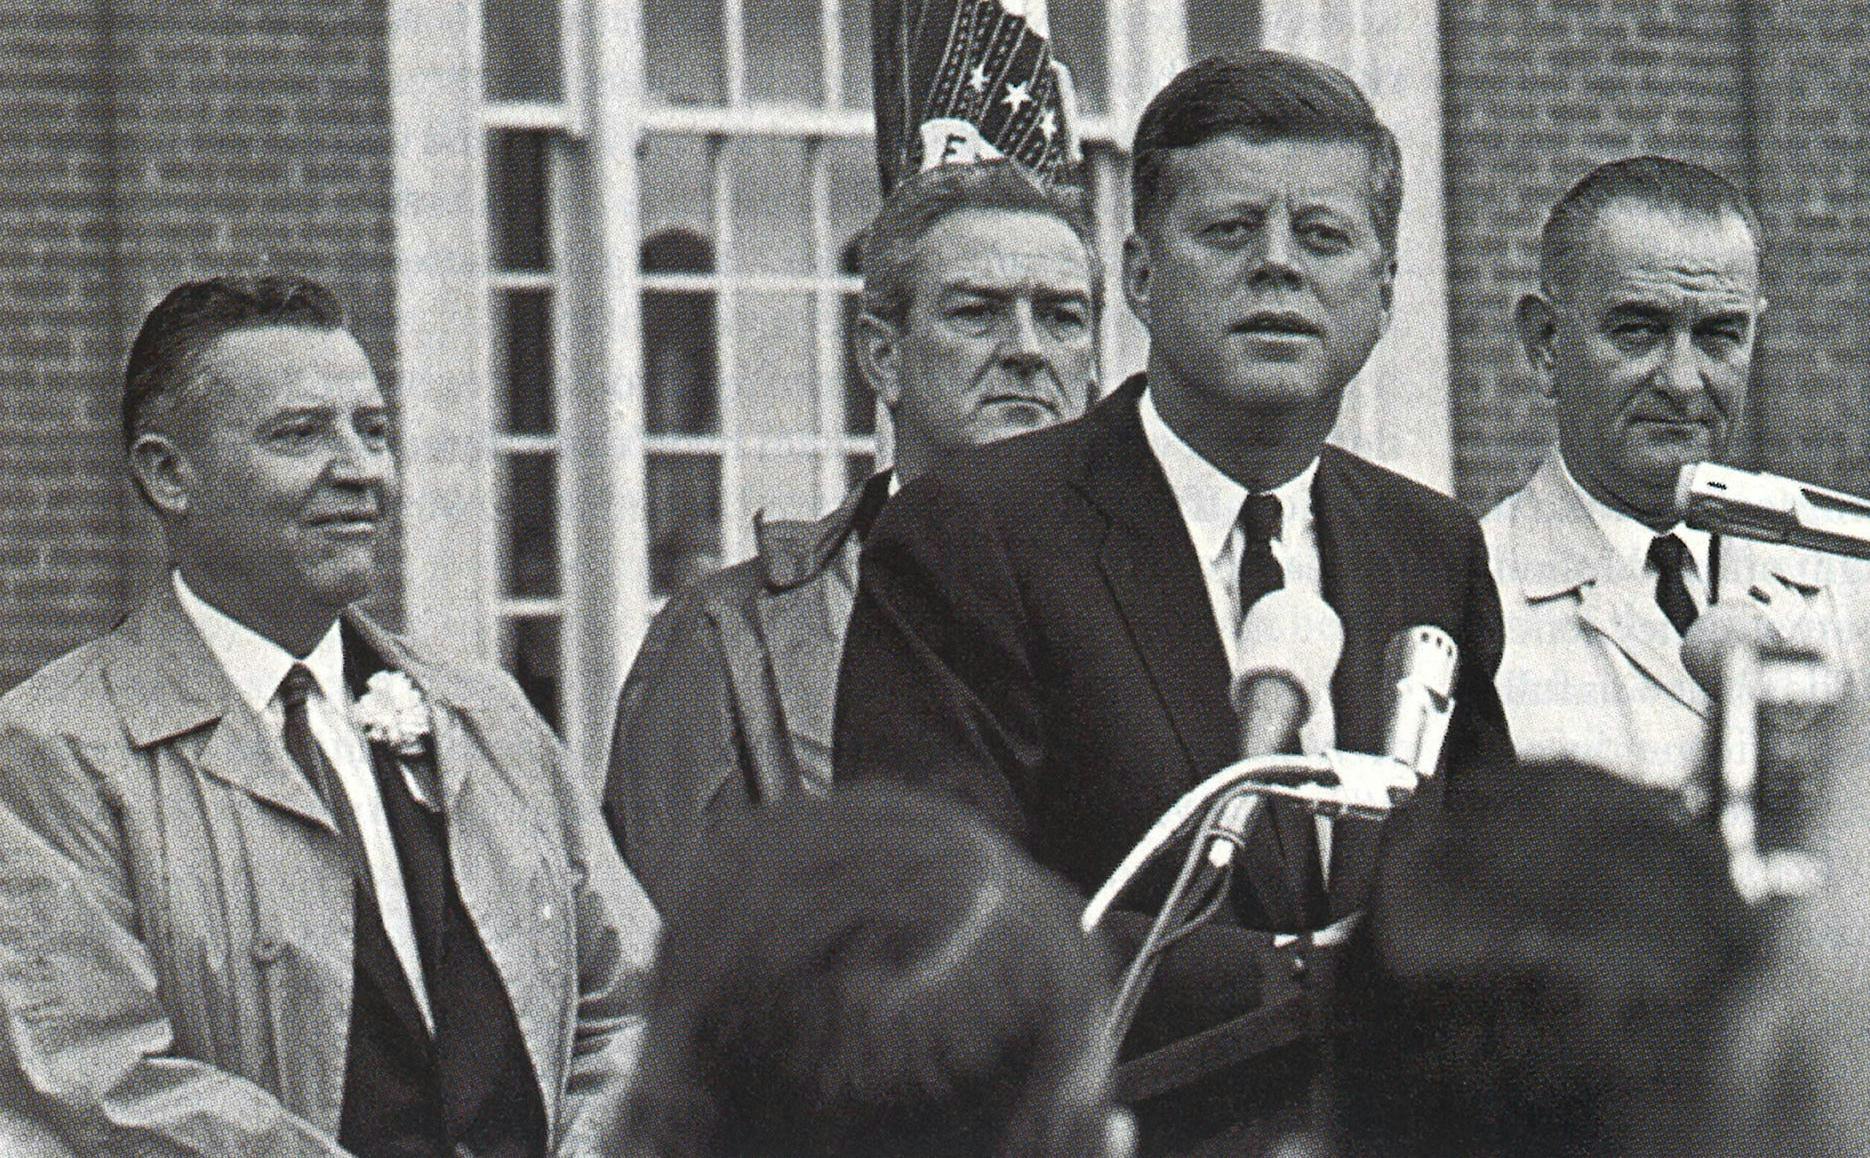 Texas senator Ralph Yarbrough (far left, next to John Connally) listens a speech in Fort Worth during Kennedy's trip to Texas. The media reported that Yarborough refused to ride in the same car as Johnson in a motorcade, and LBJ commented that the "newspaper boys went wild. It was the biggest [thing] ever since de Gaulle farted."